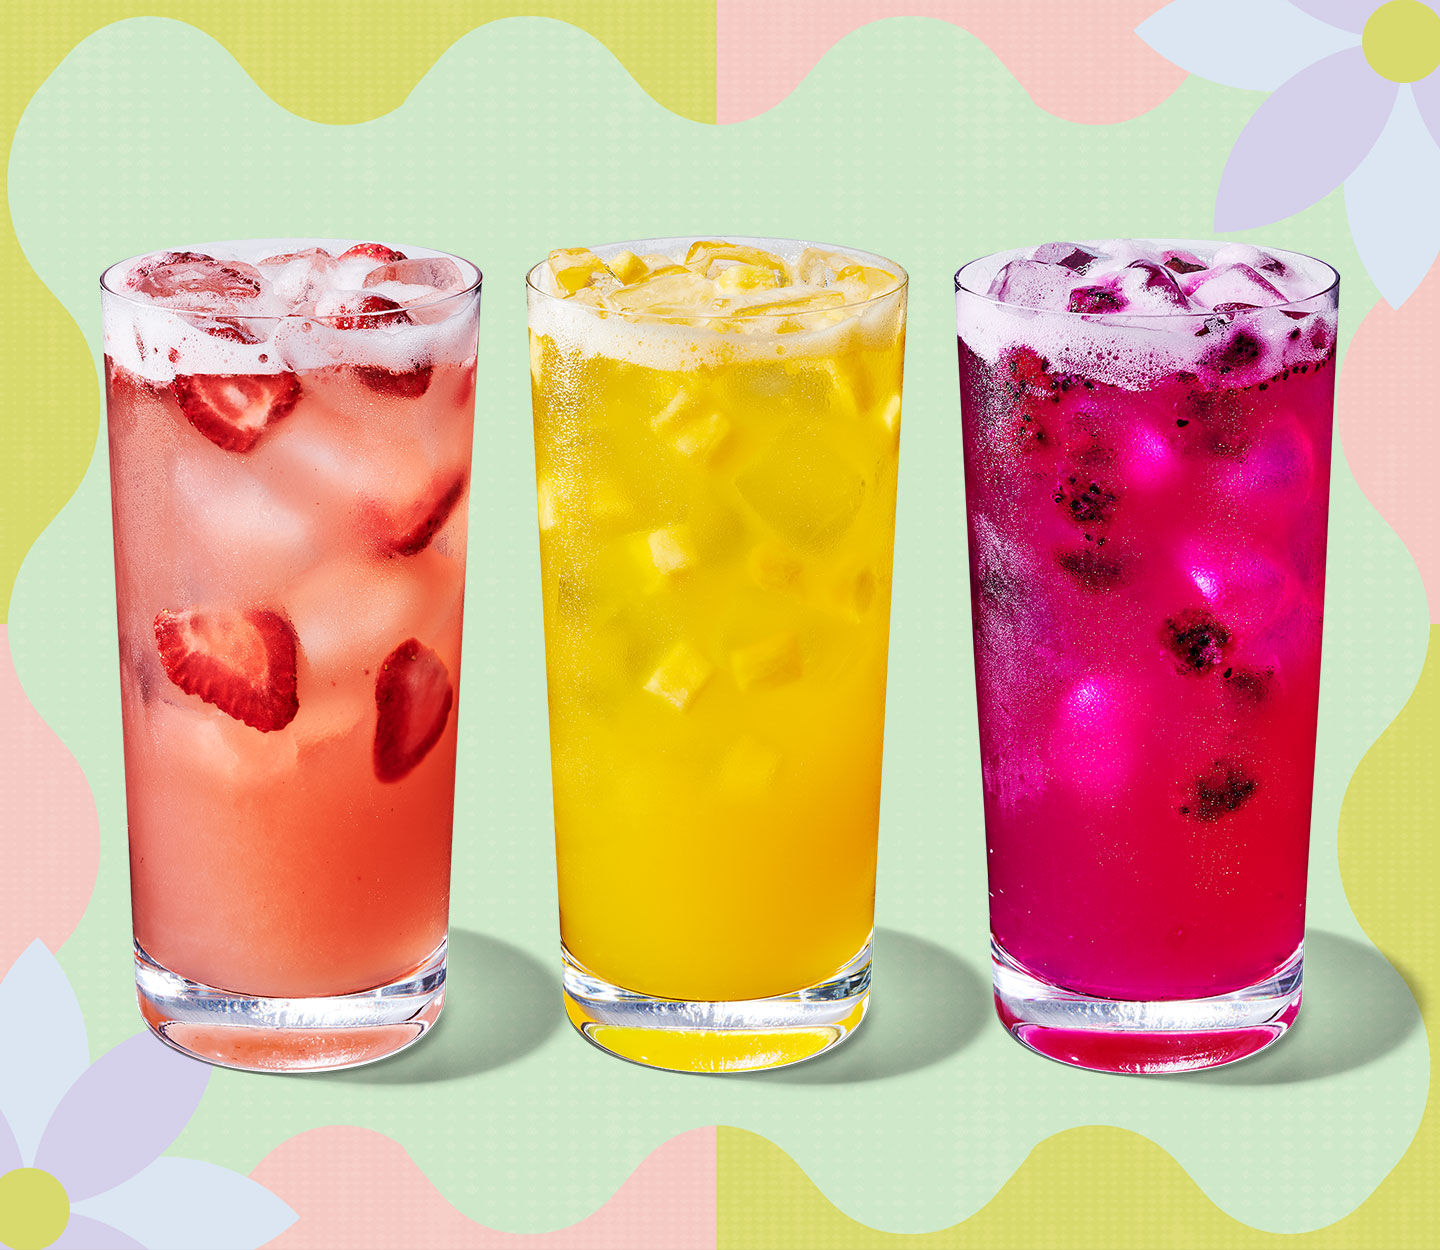 Three colorful iced drinks with fruit inclusions.